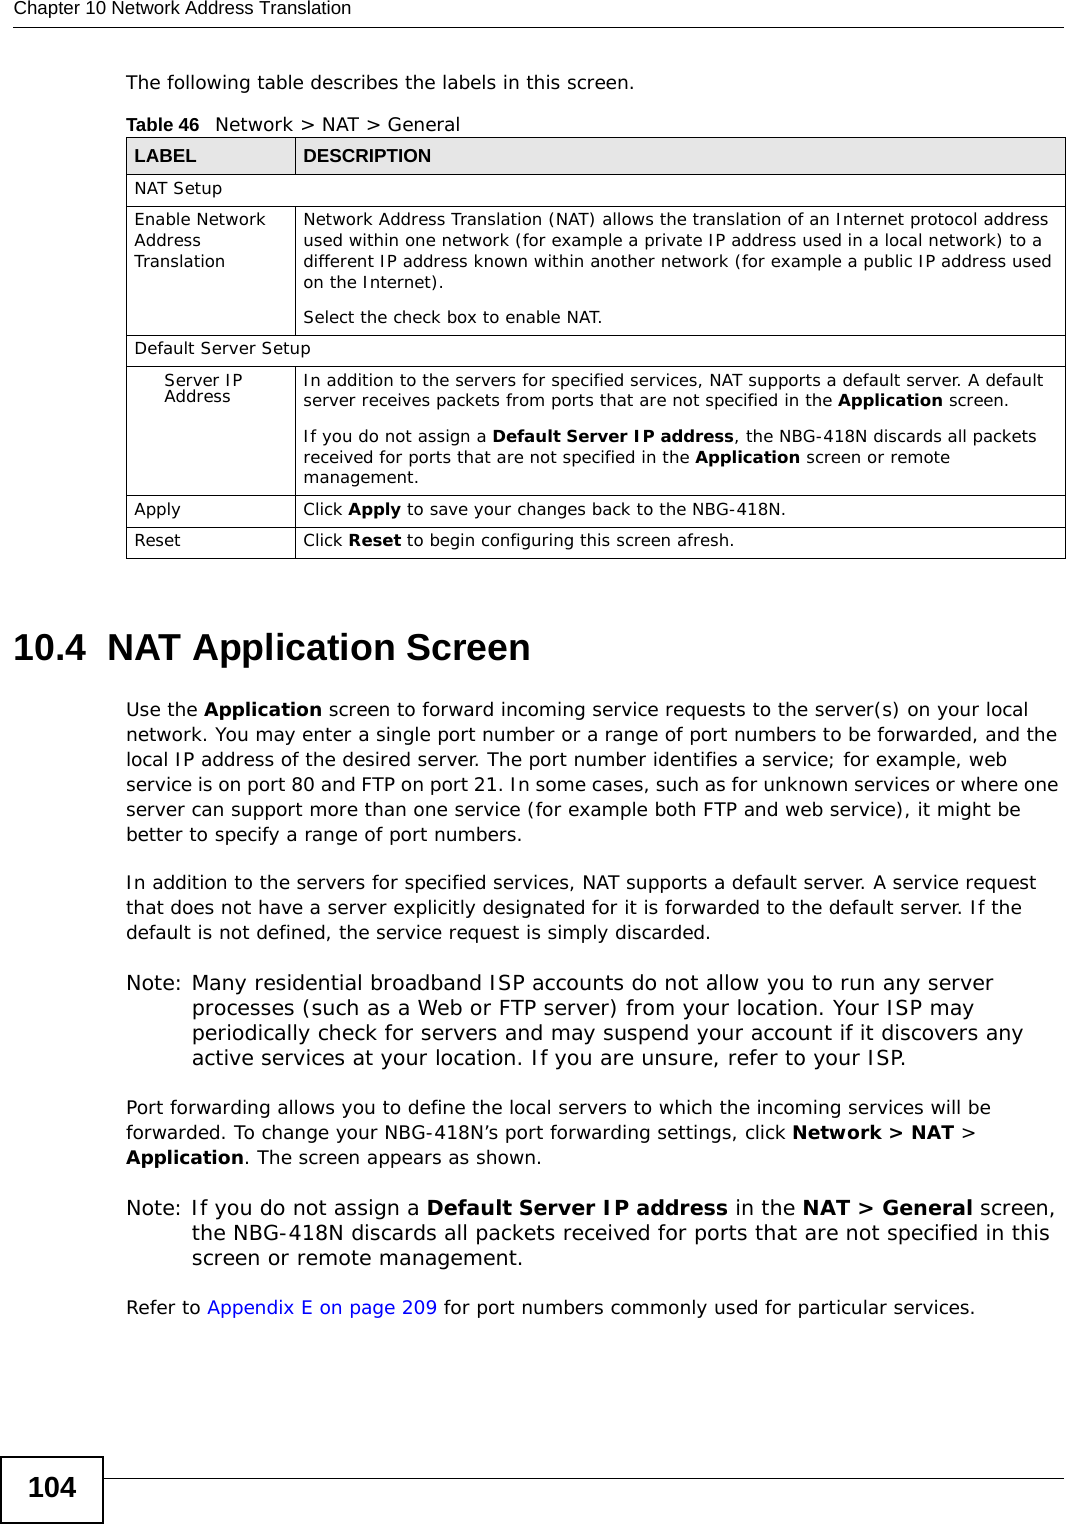 Chapter 10 Network Address Translation104The following table describes the labels in this screen.10.4  NAT Application Screen   Use the Application screen to forward incoming service requests to the server(s) on your local network. You may enter a single port number or a range of port numbers to be forwarded, and the local IP address of the desired server. The port number identifies a service; for example, web service is on port 80 and FTP on port 21. In some cases, such as for unknown services or where one server can support more than one service (for example both FTP and web service), it might be better to specify a range of port numbers.In addition to the servers for specified services, NAT supports a default server. A service request that does not have a server explicitly designated for it is forwarded to the default server. If the default is not defined, the service request is simply discarded.Note: Many residential broadband ISP accounts do not allow you to run any server processes (such as a Web or FTP server) from your location. Your ISP may periodically check for servers and may suspend your account if it discovers any active services at your location. If you are unsure, refer to your ISP.Port forwarding allows you to define the local servers to which the incoming services will be forwarded. To change your NBG-418N’s port forwarding settings, click Network &gt; NAT &gt; Application. The screen appears as shown.Note: If you do not assign a Default Server IP address in the NAT &gt; General screen, the NBG-418N discards all packets received for ports that are not specified in this screen or remote management.Refer to Appendix E on page 209 for port numbers commonly used for particular services.Table 46   Network &gt; NAT &gt; GeneralLABEL DESCRIPTIONNAT SetupEnable Network Address TranslationNetwork Address Translation (NAT) allows the translation of an Internet protocol address used within one network (for example a private IP address used in a local network) to a different IP address known within another network (for example a public IP address used on the Internet). Select the check box to enable NAT.Default Server SetupServer IP Address In addition to the servers for specified services, NAT supports a default server. A default server receives packets from ports that are not specified in the Application screen. If you do not assign a Default Server IP address, the NBG-418N discards all packets received for ports that are not specified in the Application screen or remote management.Apply Click Apply to save your changes back to the NBG-418N.Reset Click Reset to begin configuring this screen afresh.